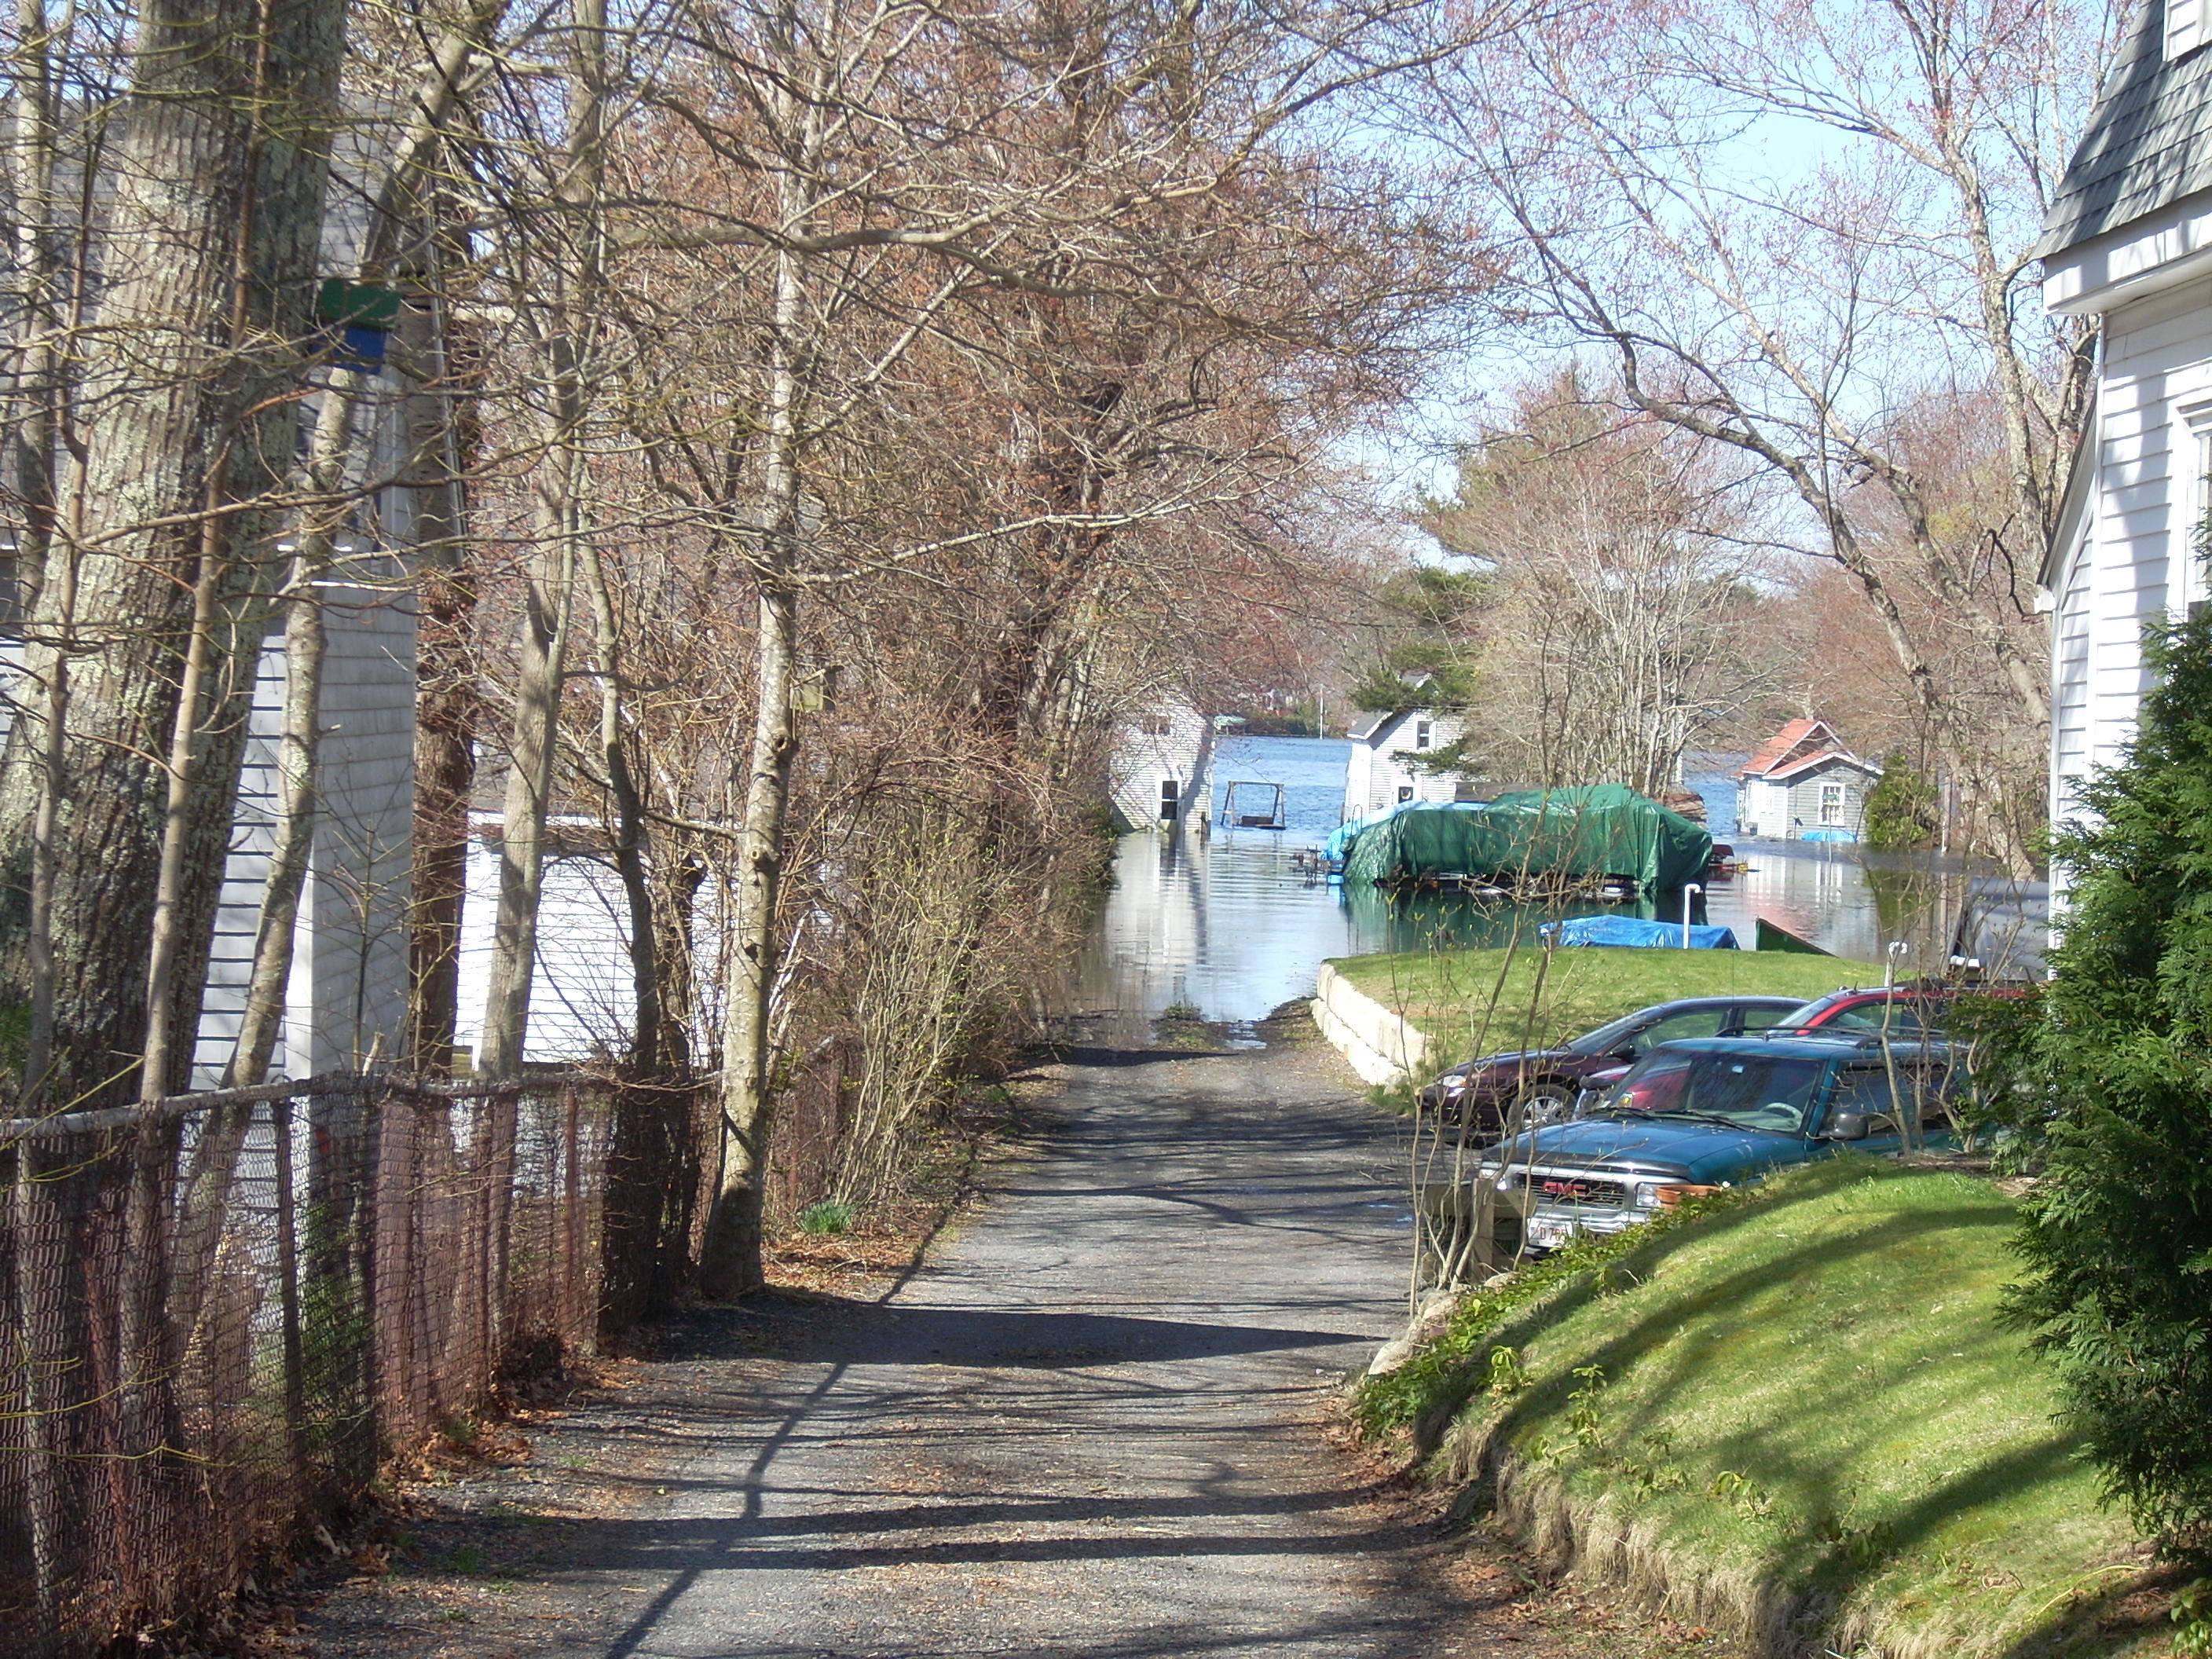 A photo taken in Lakeville, Ma 4-3-2010 